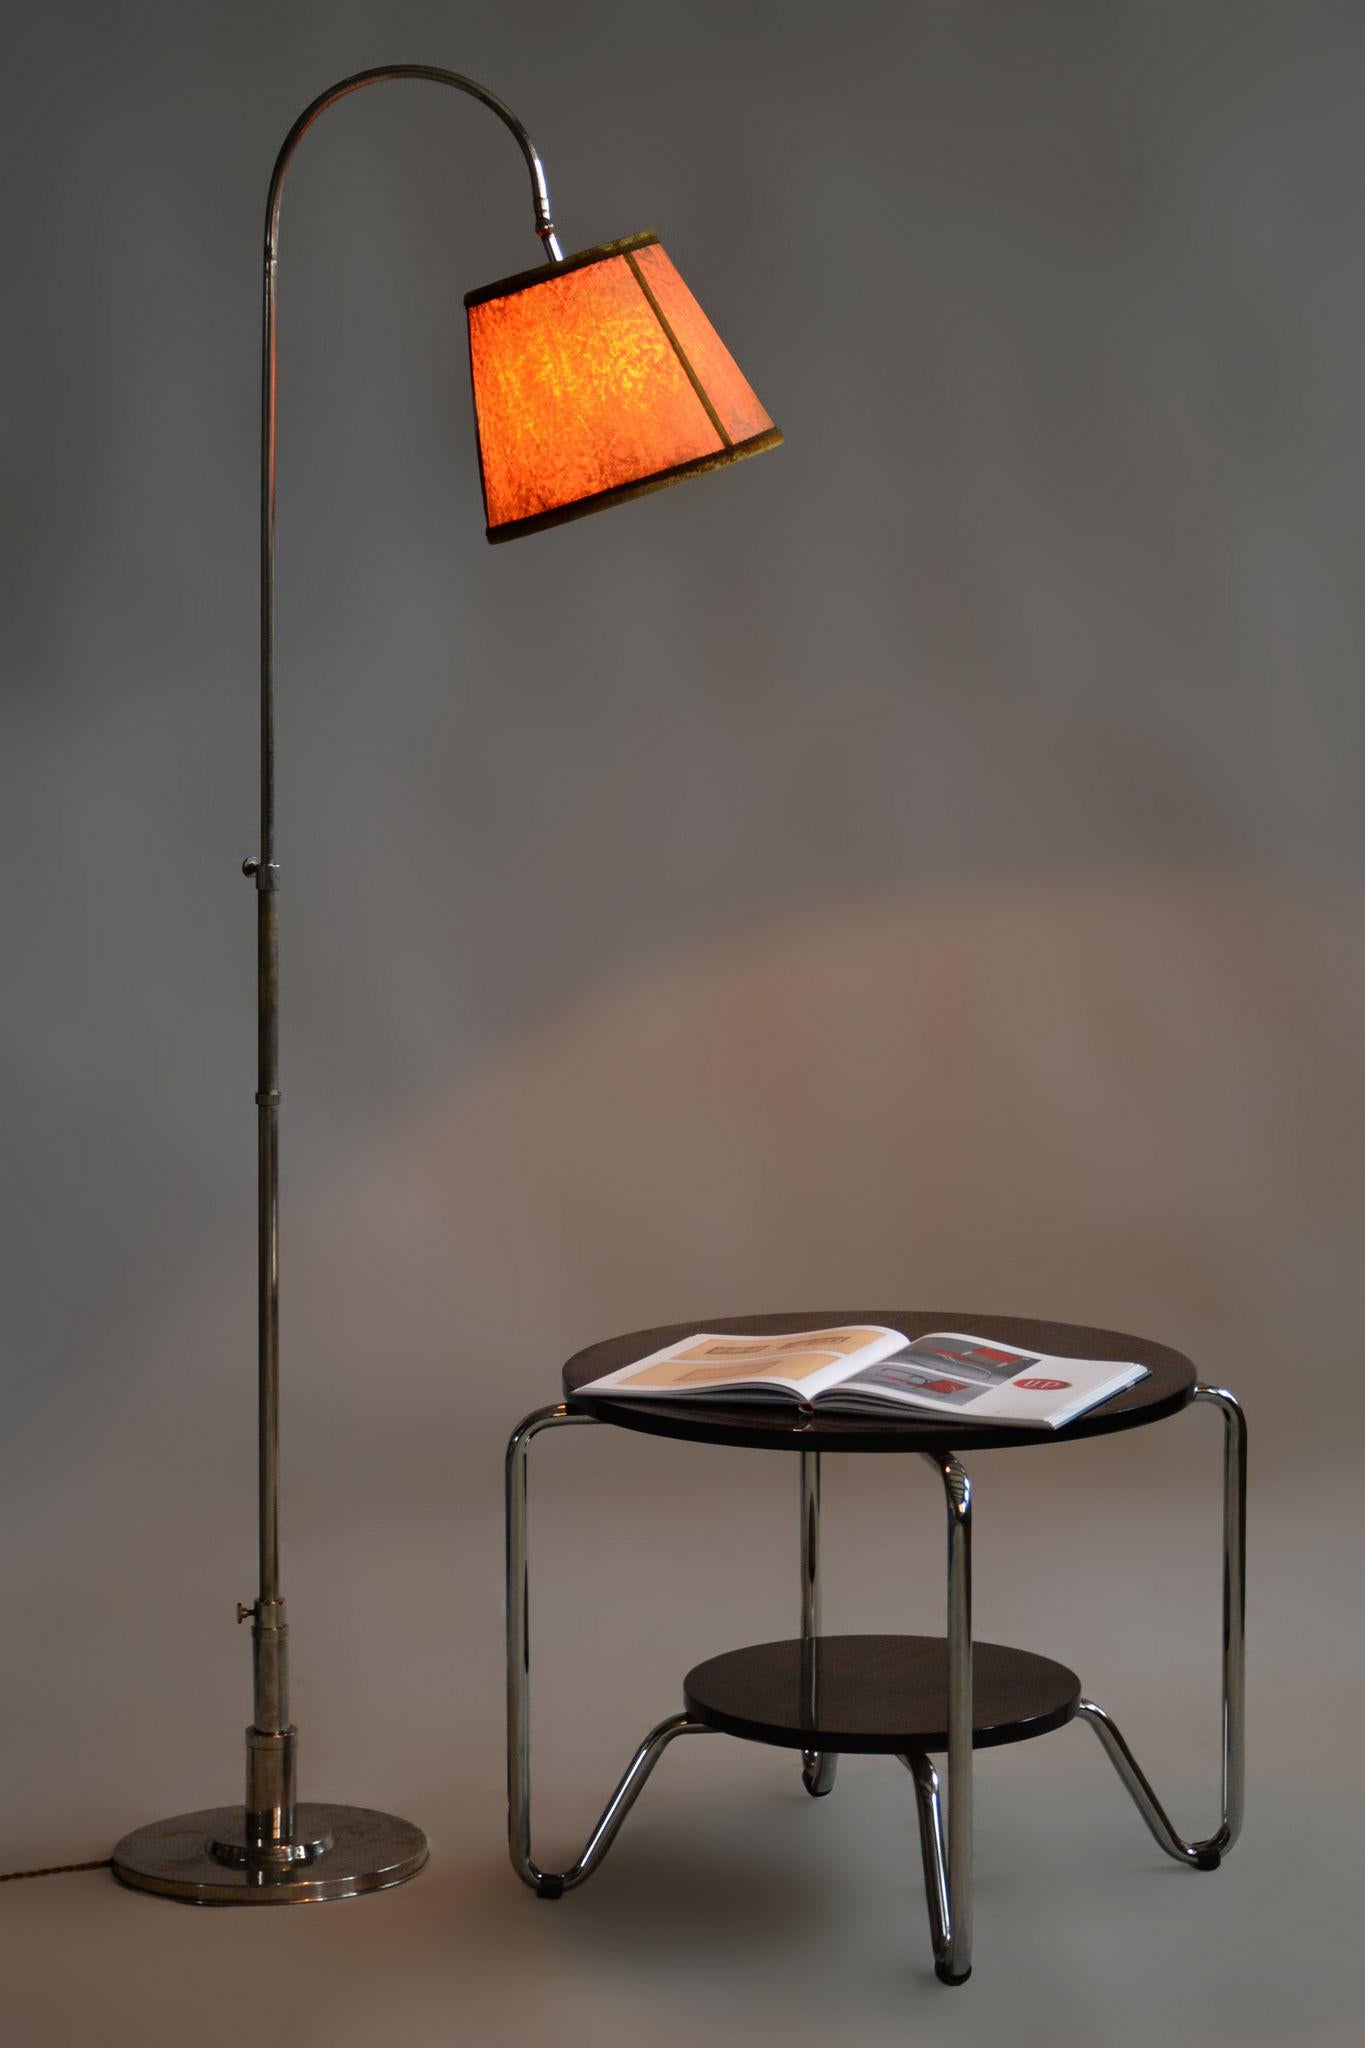 Restored Czech Bauhaus Floor Lamp, Nickel-Plated Steel, Parchment Shade, 1920s For Sale 3